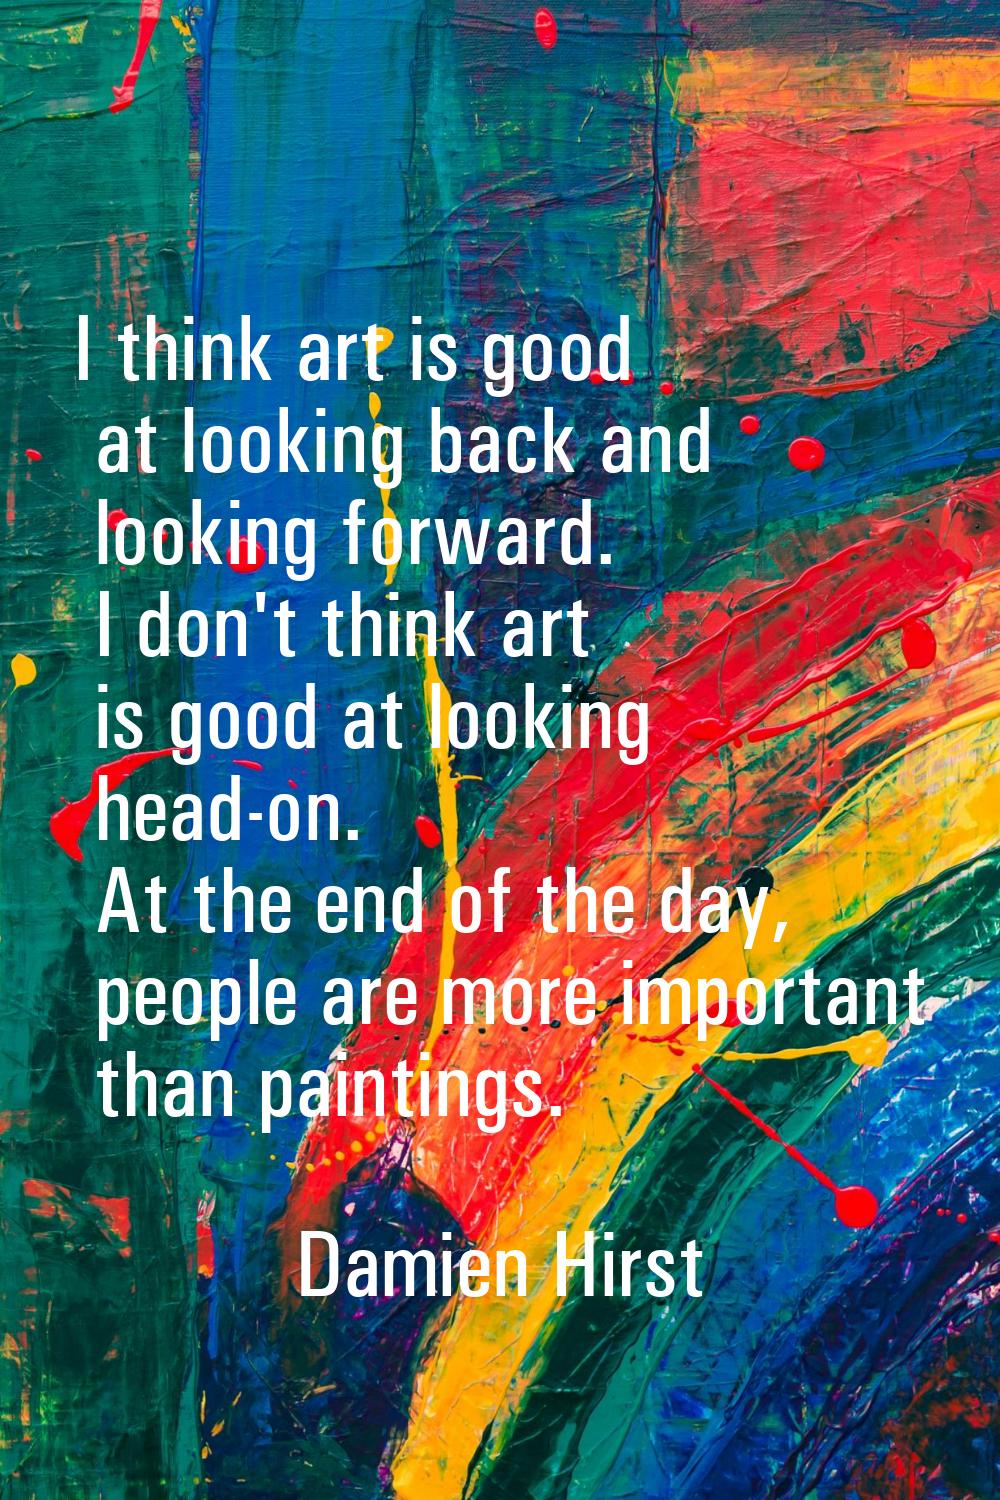 I think art is good at looking back and looking forward. I don't think art is good at looking head-